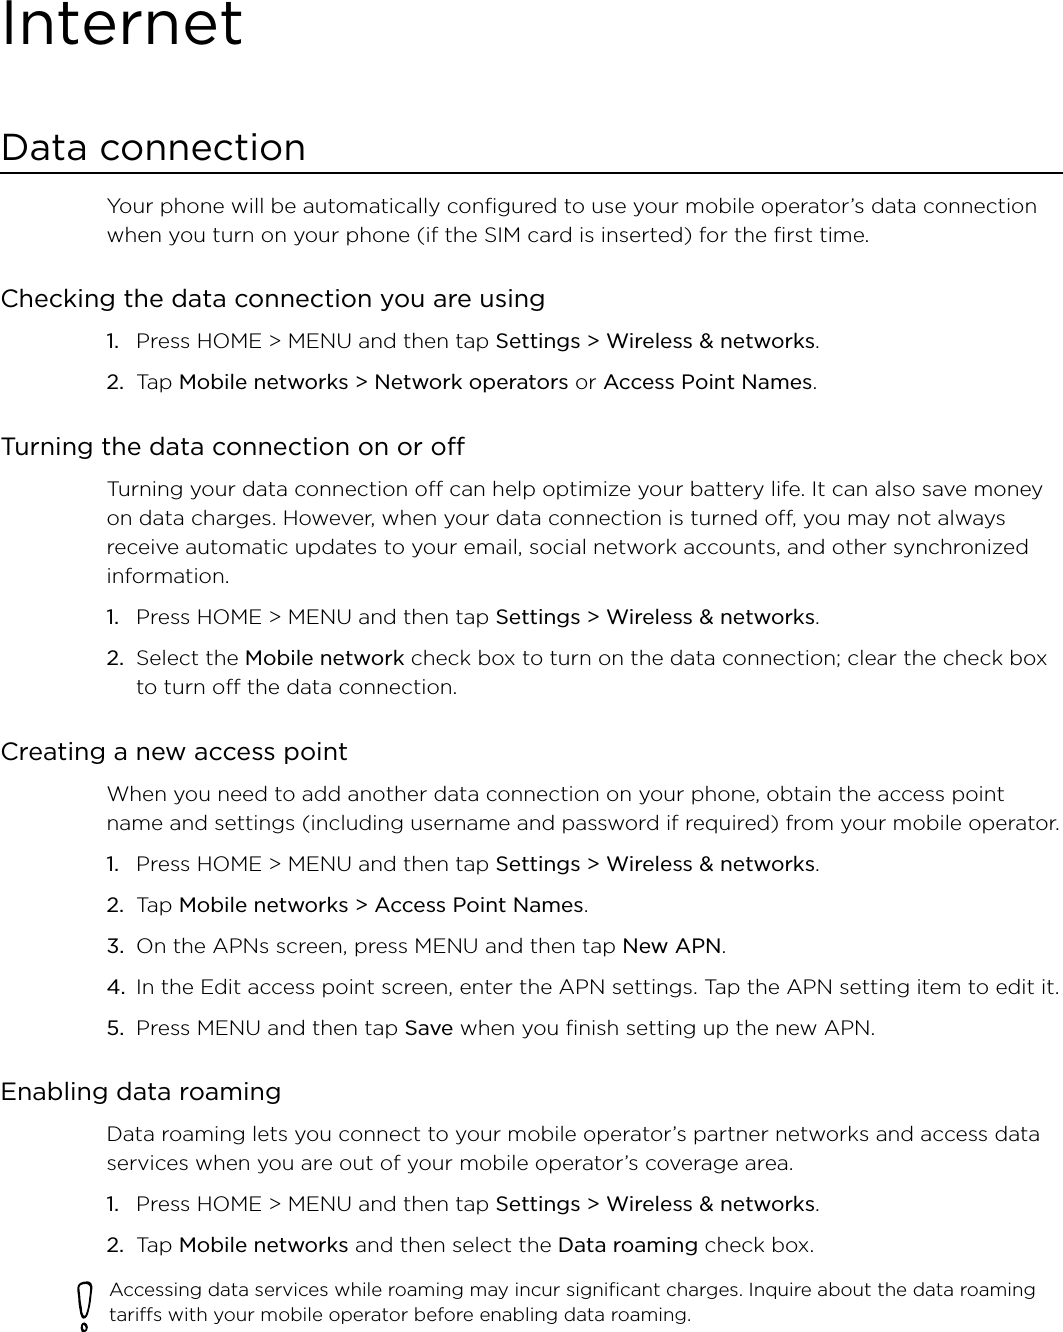 InternetData connectionYour phone will be automatically configured to use your mobile operator’s data connection when you turn on your phone (if the SIM card is inserted) for the first time. Checking the data connection you are using Press HOME &gt; MENU and then tap Settings &gt; Wireless &amp; networks. Tap Mobile networks &gt; Network operators or Access Point Names. Turning the data connection on or offTurning your data connection off can help optimize your battery life. It can also save money on data charges. However, when your data connection is turned off, you may not always receive automatic updates to your email, social network accounts, and other synchronized information.Press HOME &gt; MENU and then tap Settings &gt; Wireless &amp; networks. Select the Mobile network check box to turn on the data connection; clear the check box to turn off the data connection. Creating a new access pointWhen you need to add another data connection on your phone, obtain the access point name and settings (including username and password if required) from your mobile operator.Press HOME &gt; MENU and then tap Settings &gt; Wireless &amp; networks. Tap Mobile networks &gt; Access Point Names. On the APNs screen, press MENU and then tap New APN. In the Edit access point screen, enter the APN settings. Tap the APN setting item to edit it. Press MENU and then tap Save when you finish setting up the new APN. Enabling data roamingData roaming lets you connect to your mobile operator’s partner networks and access data services when you are out of your mobile operator’s coverage area.Press HOME &gt; MENU and then tap Settings &gt; Wireless &amp; networks.Tap Mobile networks and then select the Data roaming check box.Accessing data services while roaming may incur significant charges. Inquire about the data roaming tariffs with your mobile operator before enabling data roaming.1.2.1.2.1.2.3.4.5.1.2.